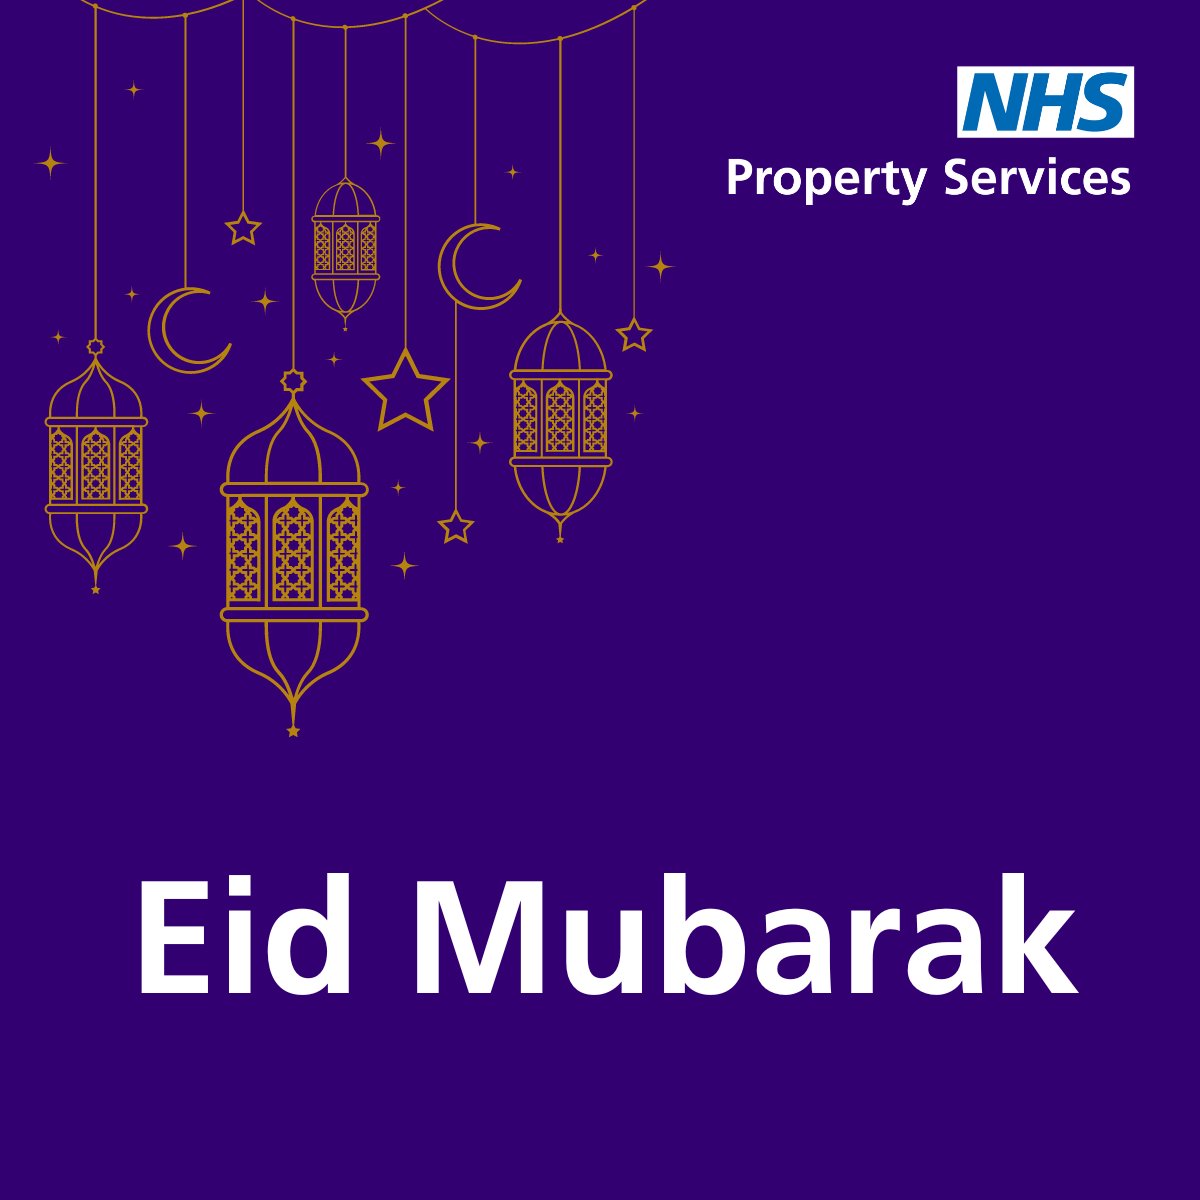 #EidMubarak to our colleagues, friends and communities! Wishing you a very happy and joyous day with your loved ones ✨